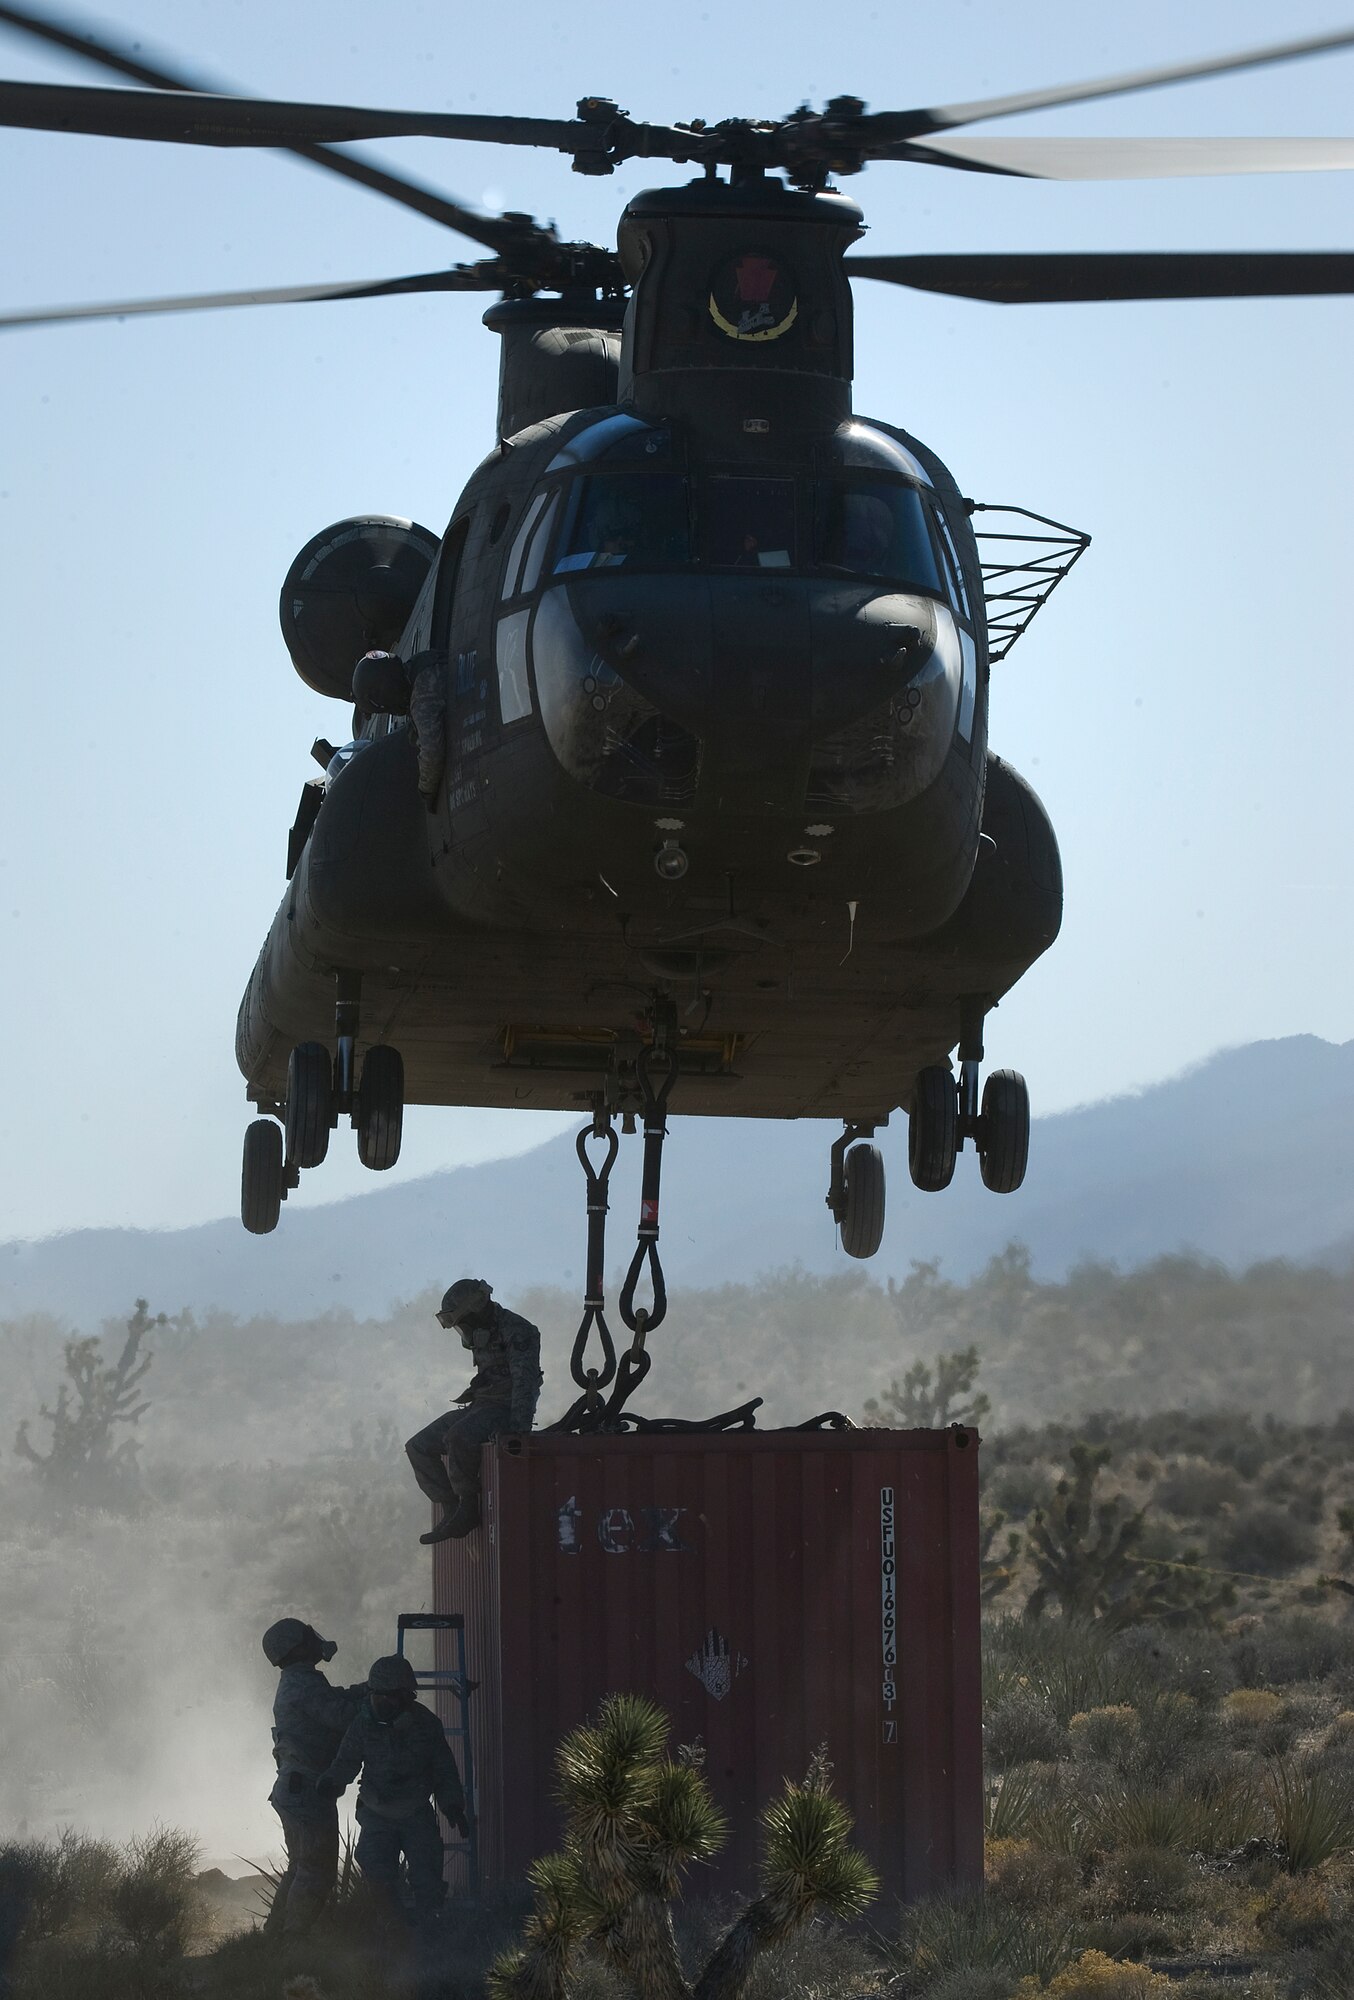 U.S. Air Force Airmen, 820th RED HORSE Squadron airborne flight, completes a connex box sling load to a CH-47 Chinook, Army National Guard, Stockton, CA, during a peacetime operation Nov. 9, 2011, at Alamo, Nev.The sling load training and air assault certification of 820th RHS airborne flight Airmen proved crucial in the success of the quick response operation. (U.S. Air Force photo by Tech Sgt. Bob Sommer/Released)